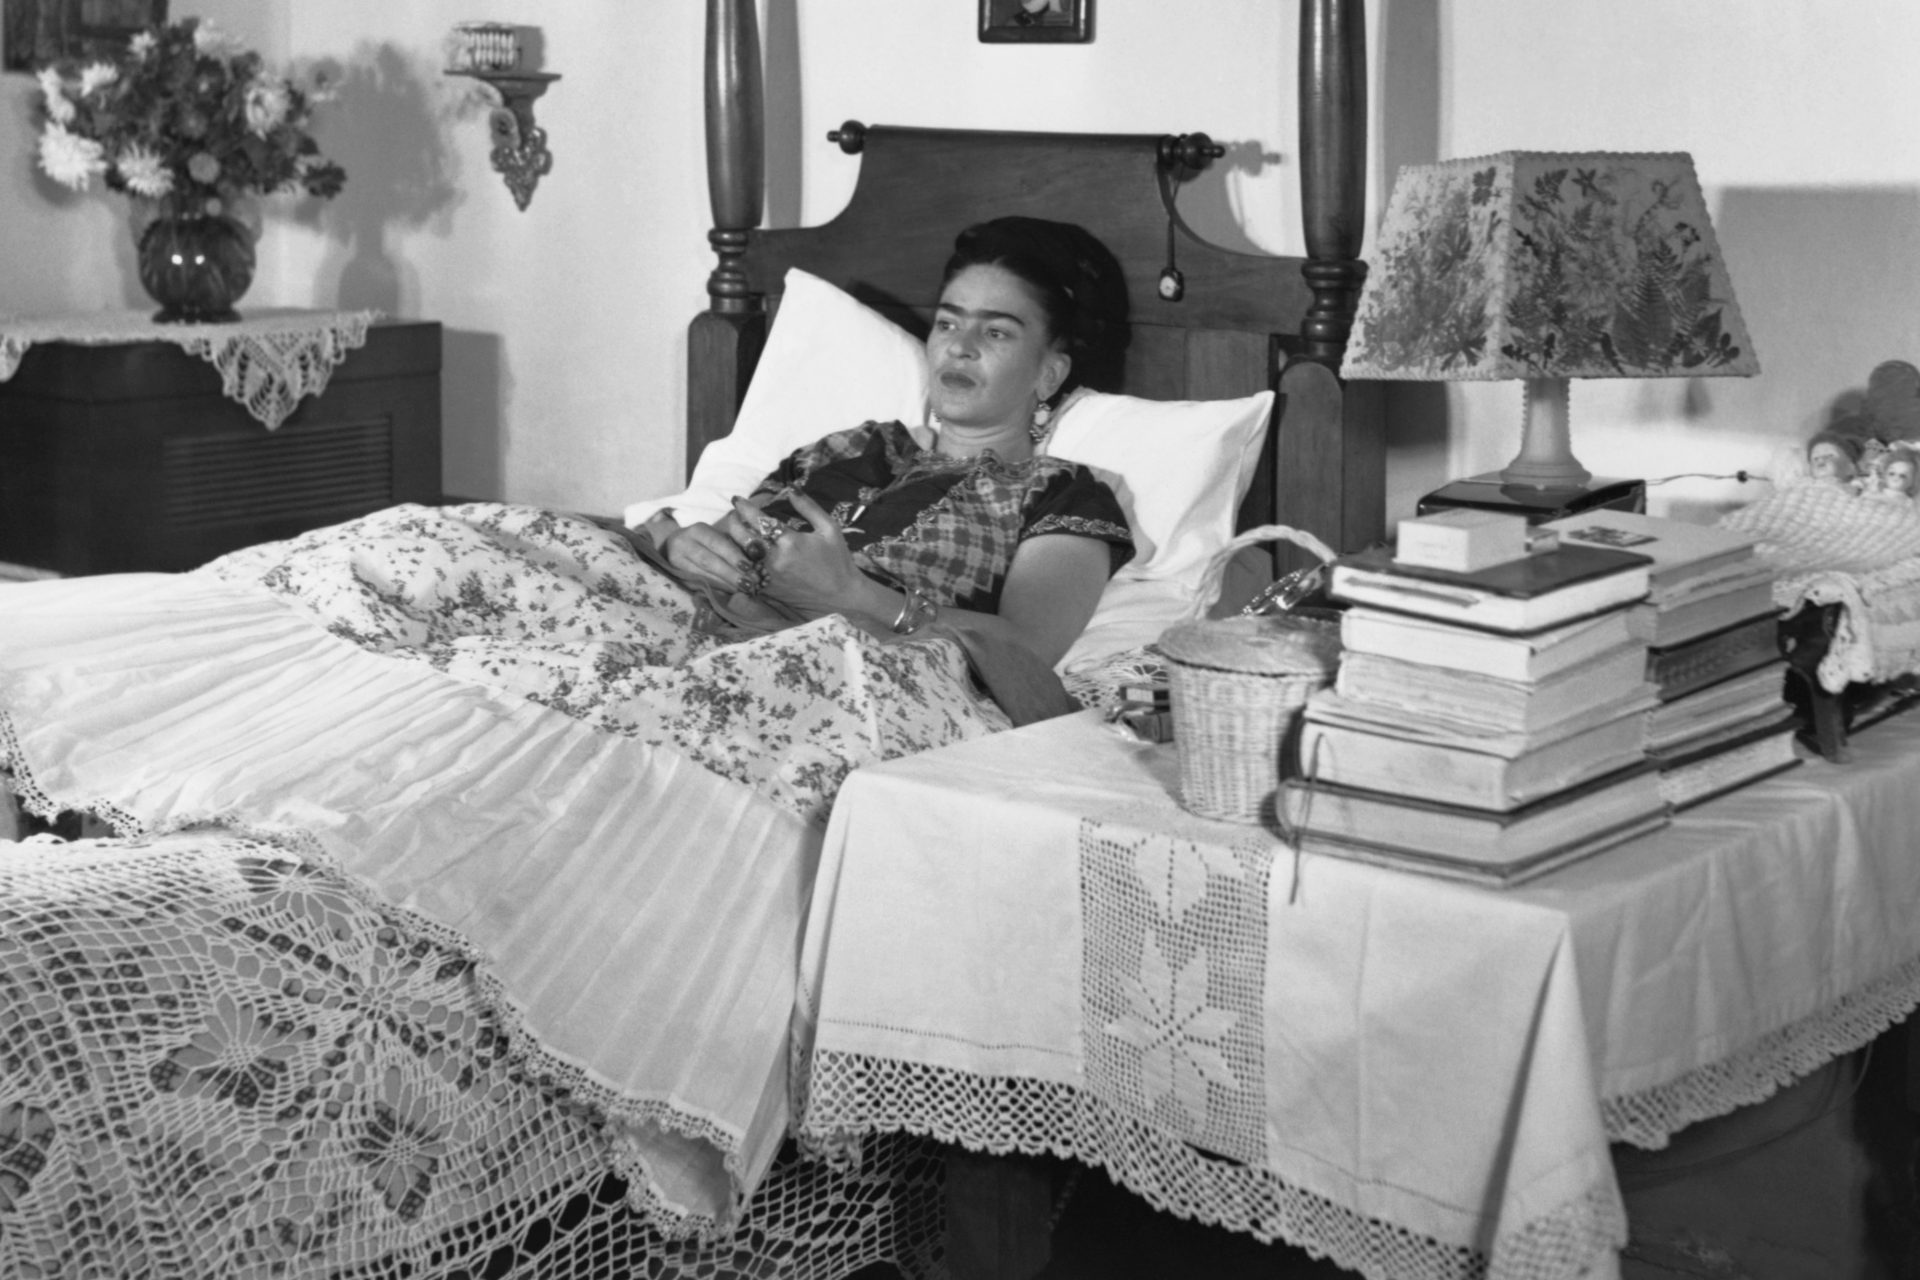 Who wouldn't want to see where Frida Kahlo lived?